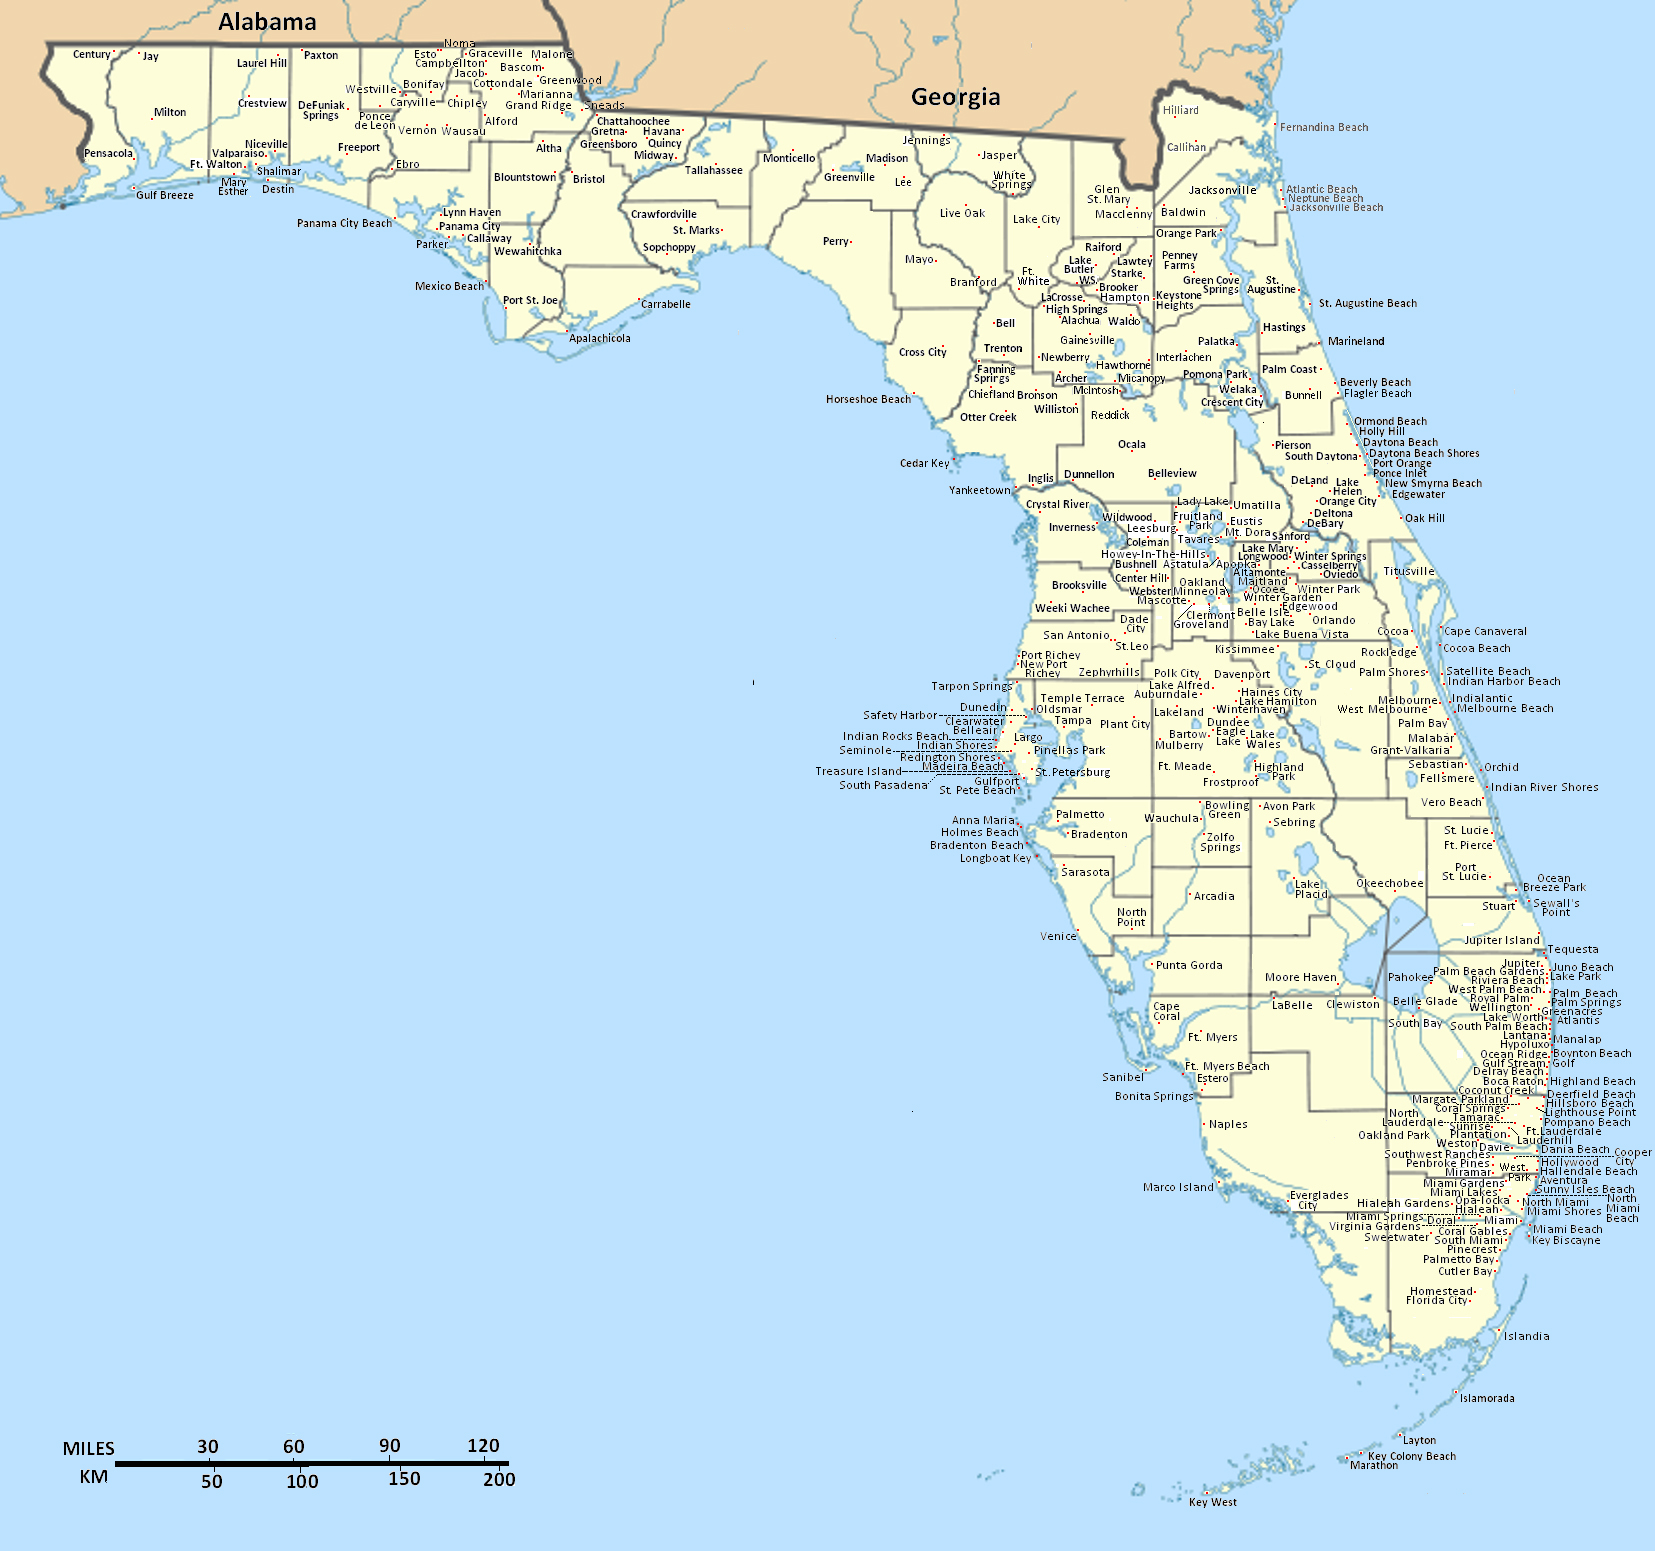 detailed-florida-state-map-with-cities-florida-state-usa-maps-of-the-usa-maps-collection